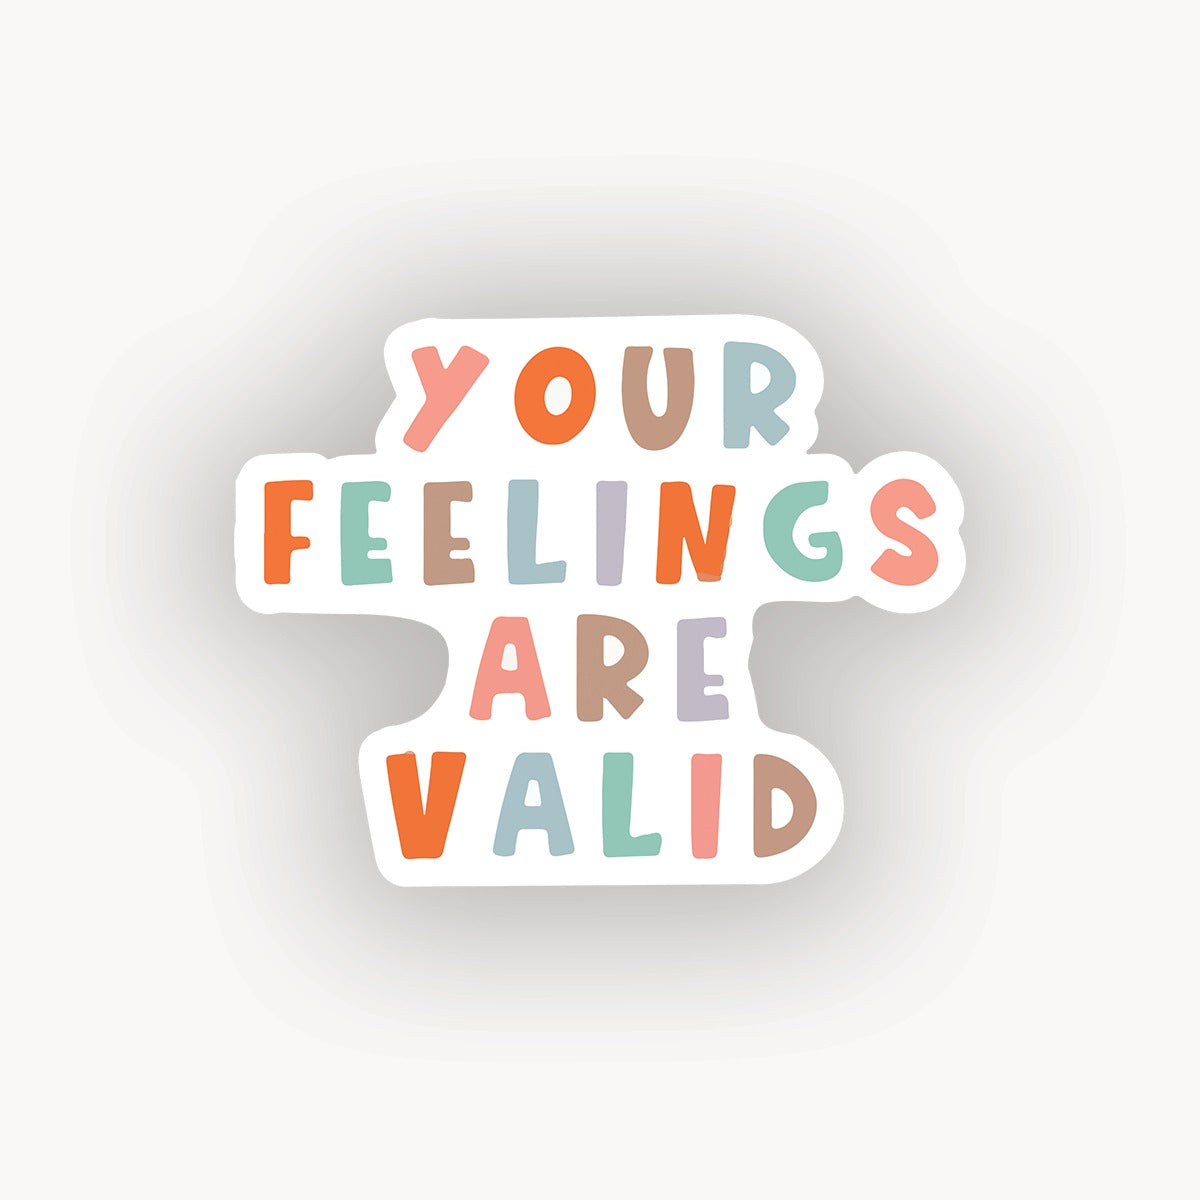 Your feelings are valid